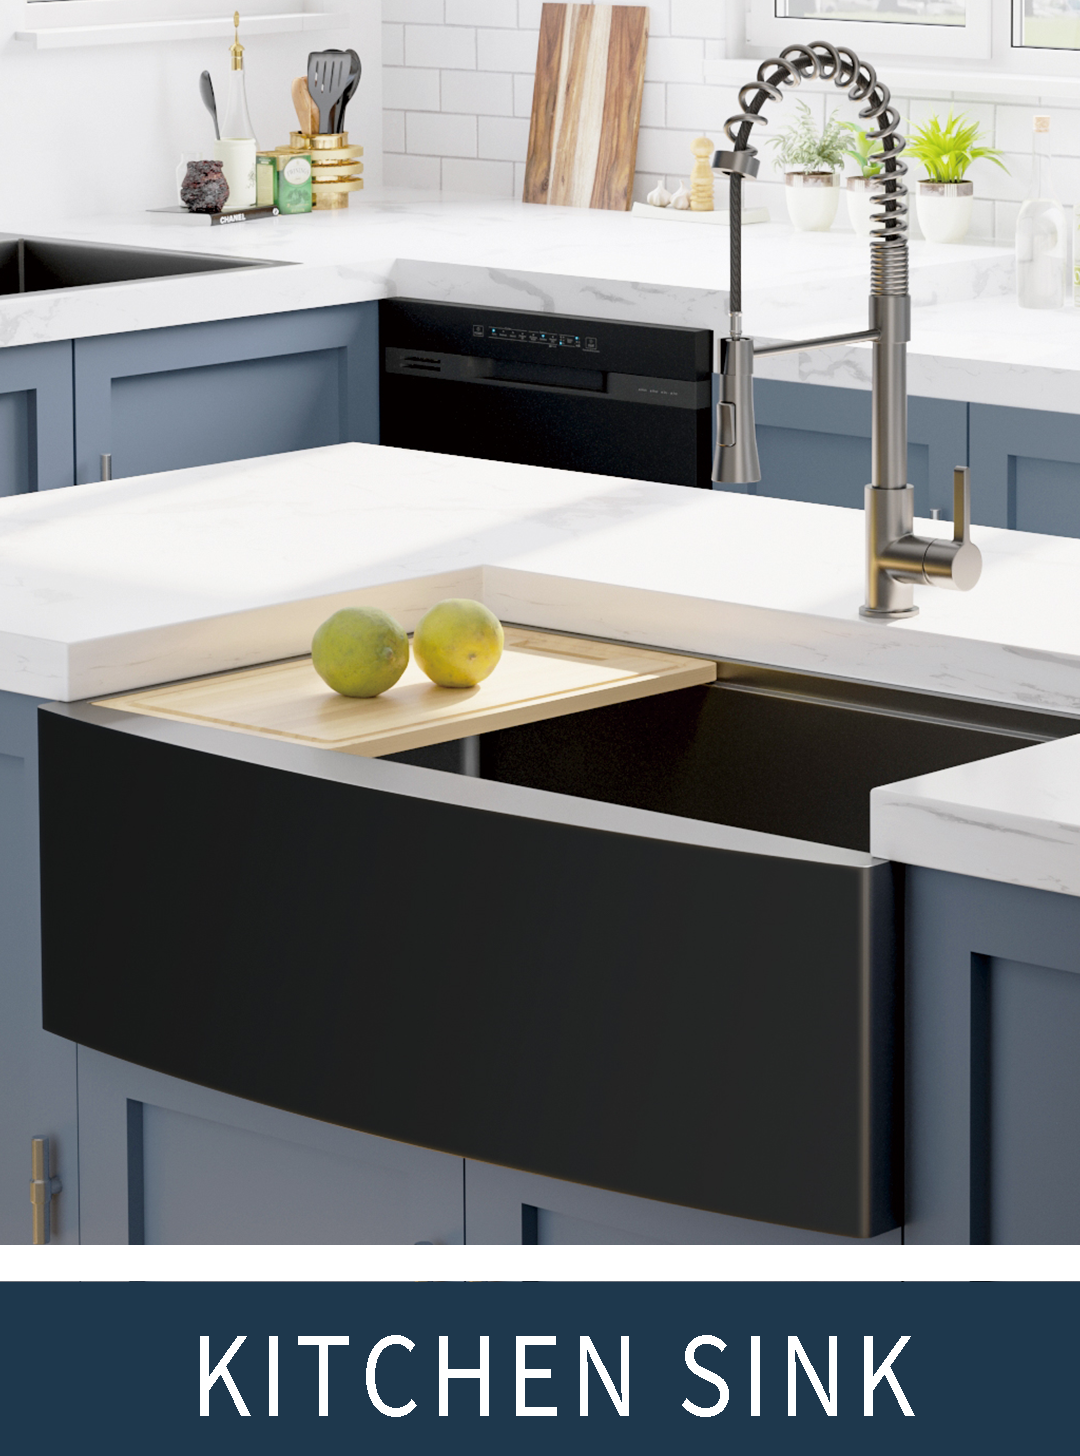 What are the eco-friendly options for kitchen faucets?